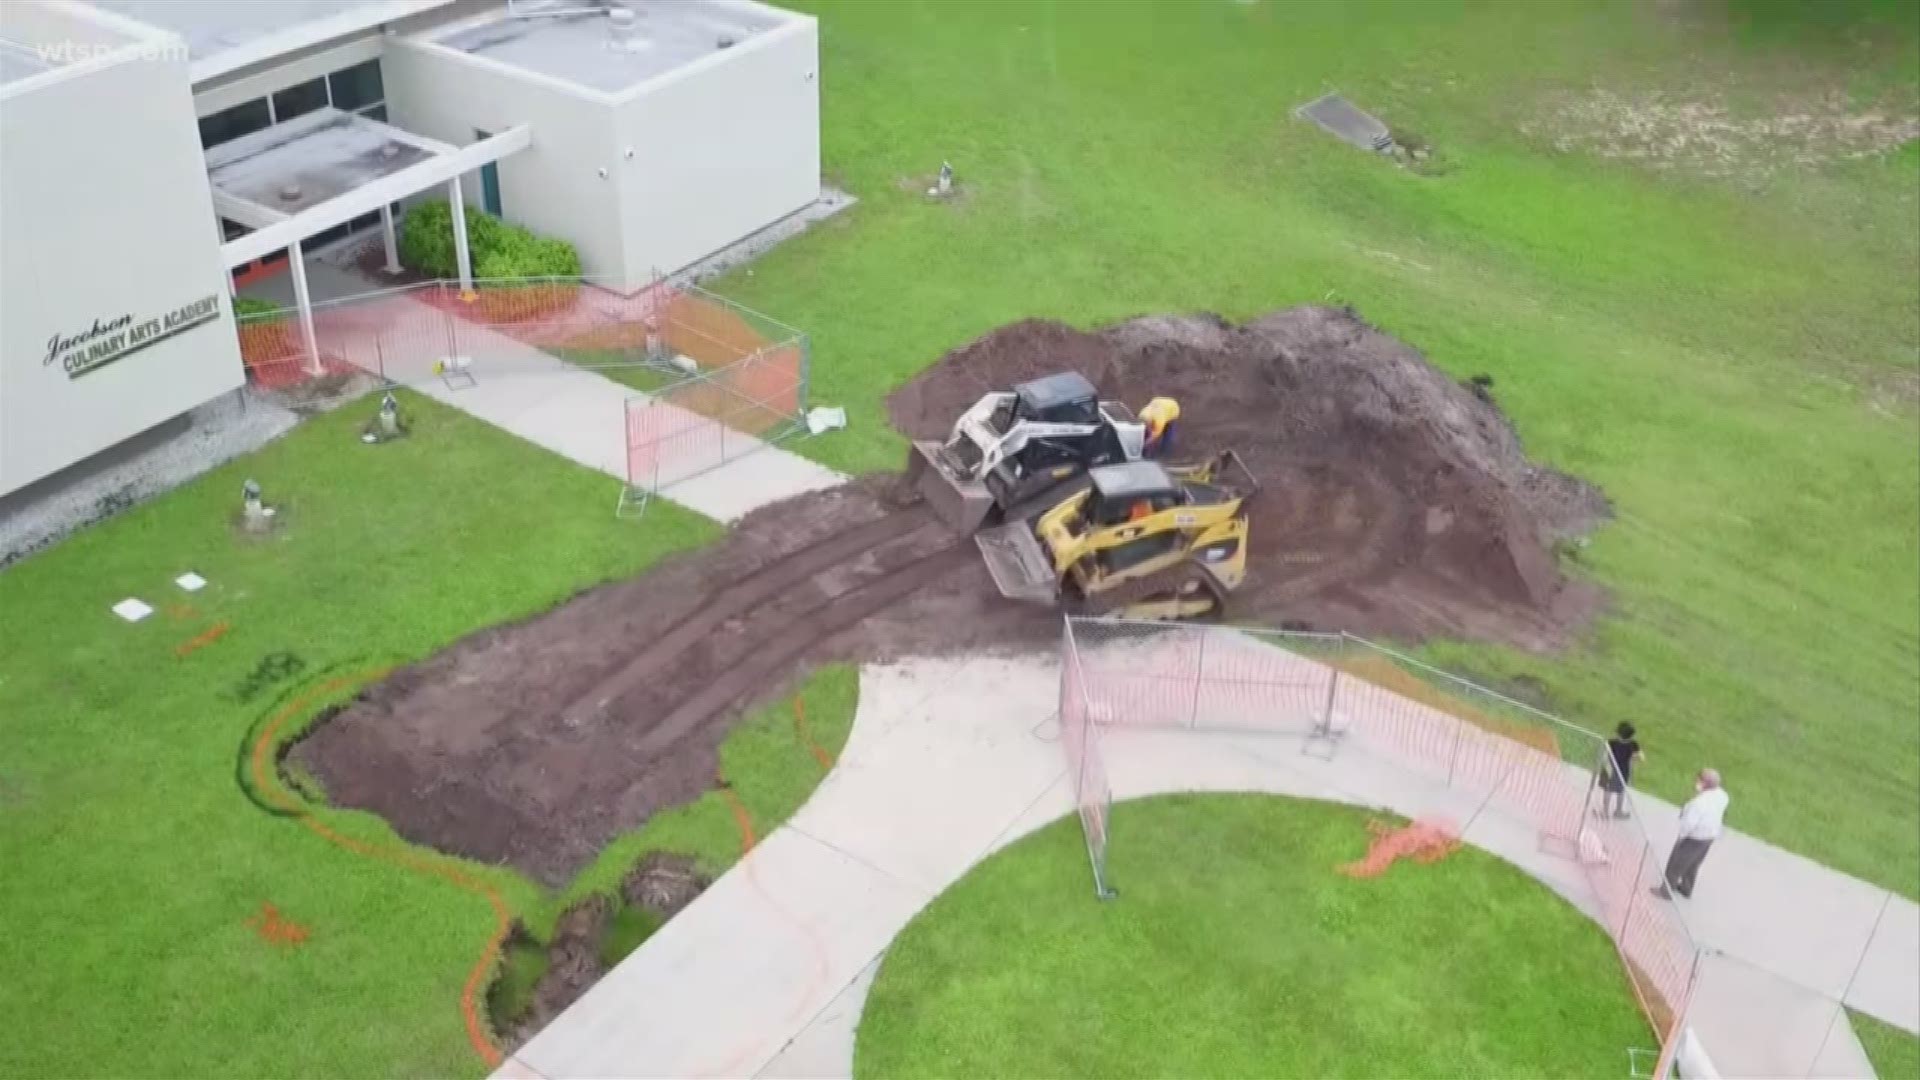 A large hole opened up Friday morning on the Tarpon Springs High School campus.

The hole is near the school's culinary building. The hole appears to be close to a sidewalk, and photos show chunks of grass had fallen in the opening filled with dirt.

Pinellas County school district spokesperson Lisa Wolf-Chason said a staff member noticed the hole around 6:45 a.m. Friday before students arrived. The district facility staff is responding and will evaluate what the hole is and how to proceed.